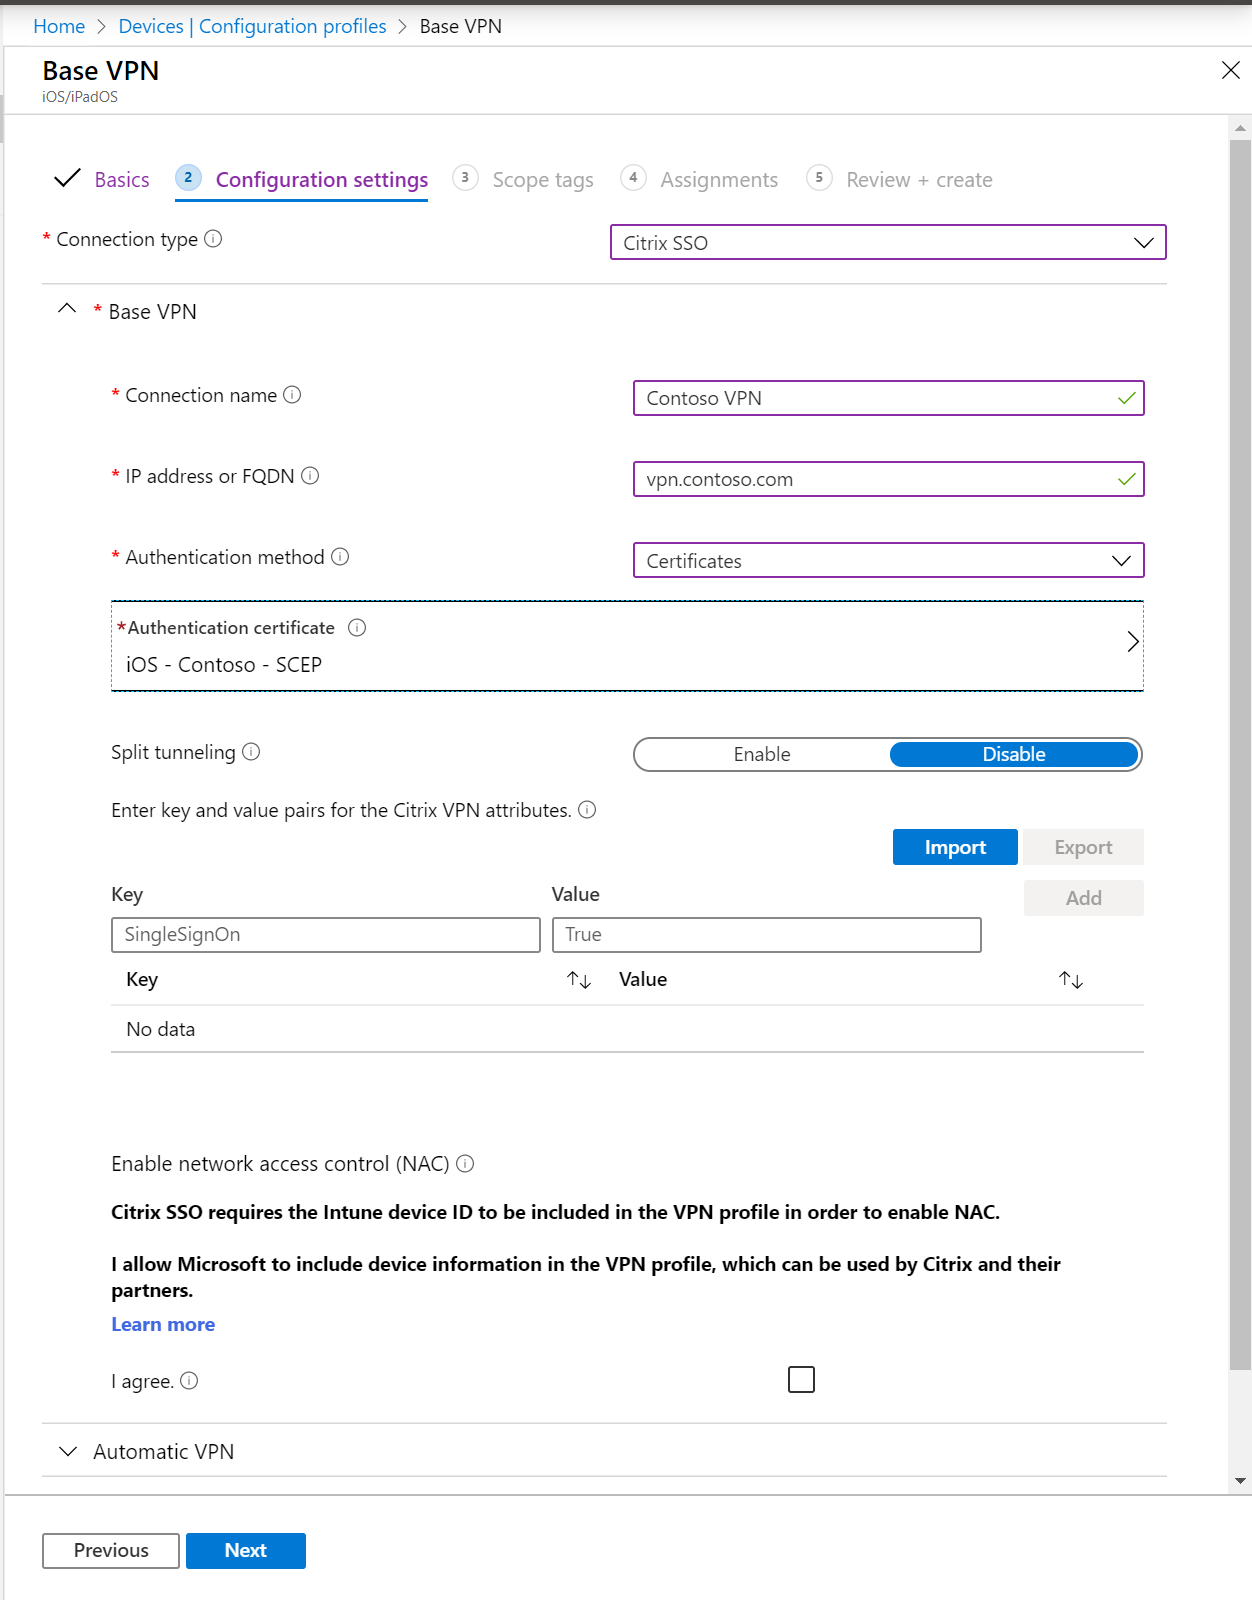 In a per-app VPN profile, enter a connection, IP address or FQDN, authentication method, and split tunneling in Microsoft Intune and Intune admin center.